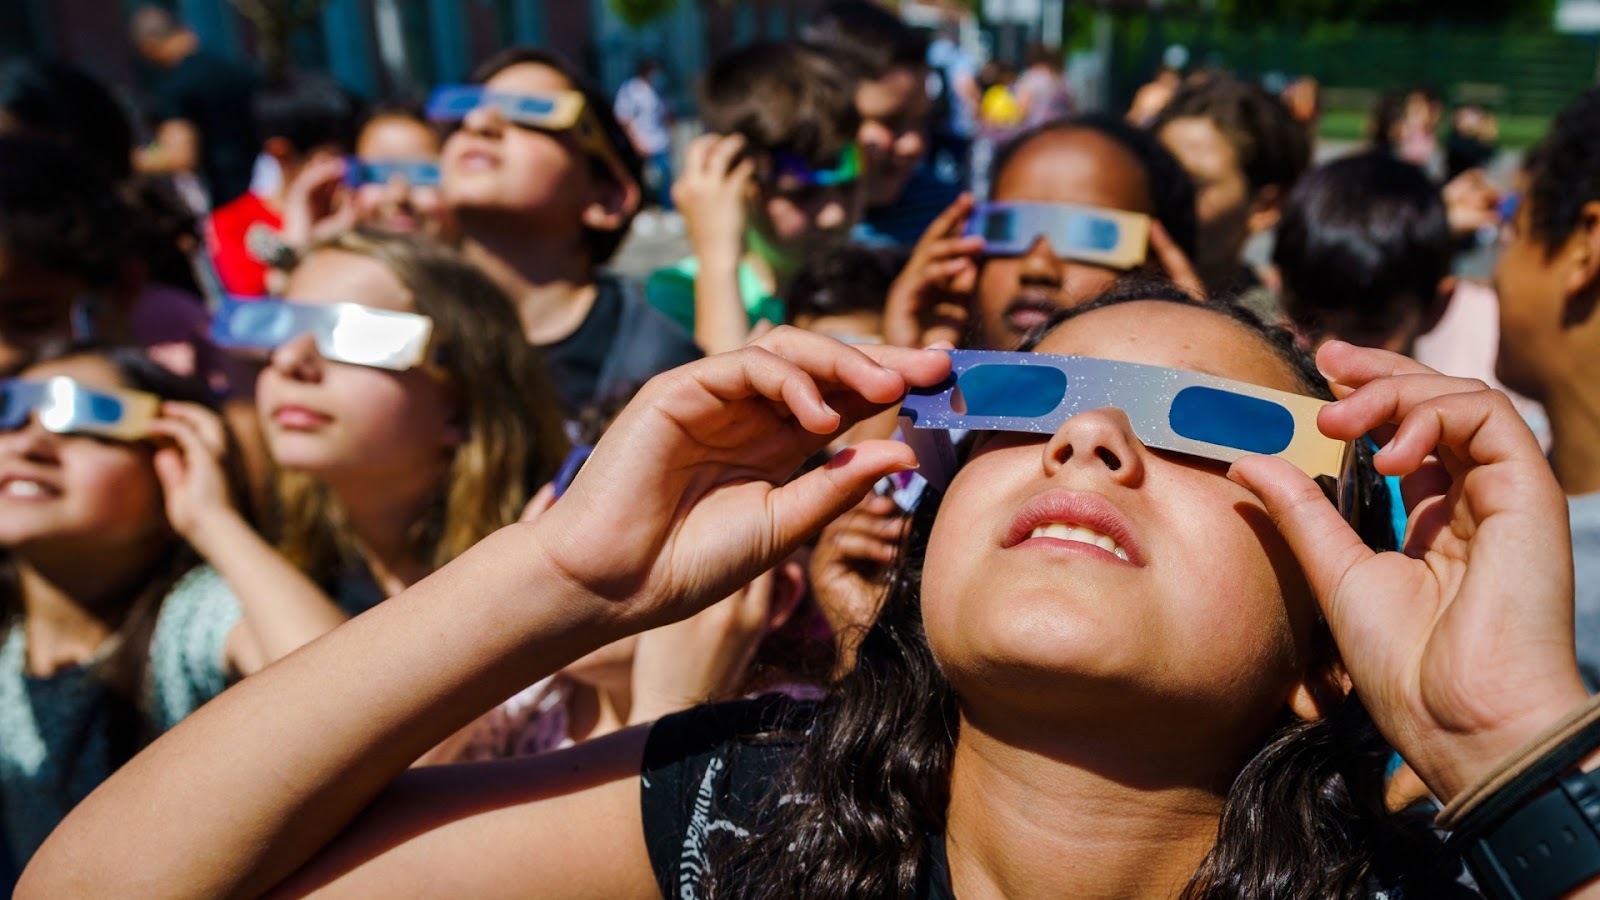 Solar eclipse glasses: Where to buy a safe, certified pair before April 8 |  Live Science